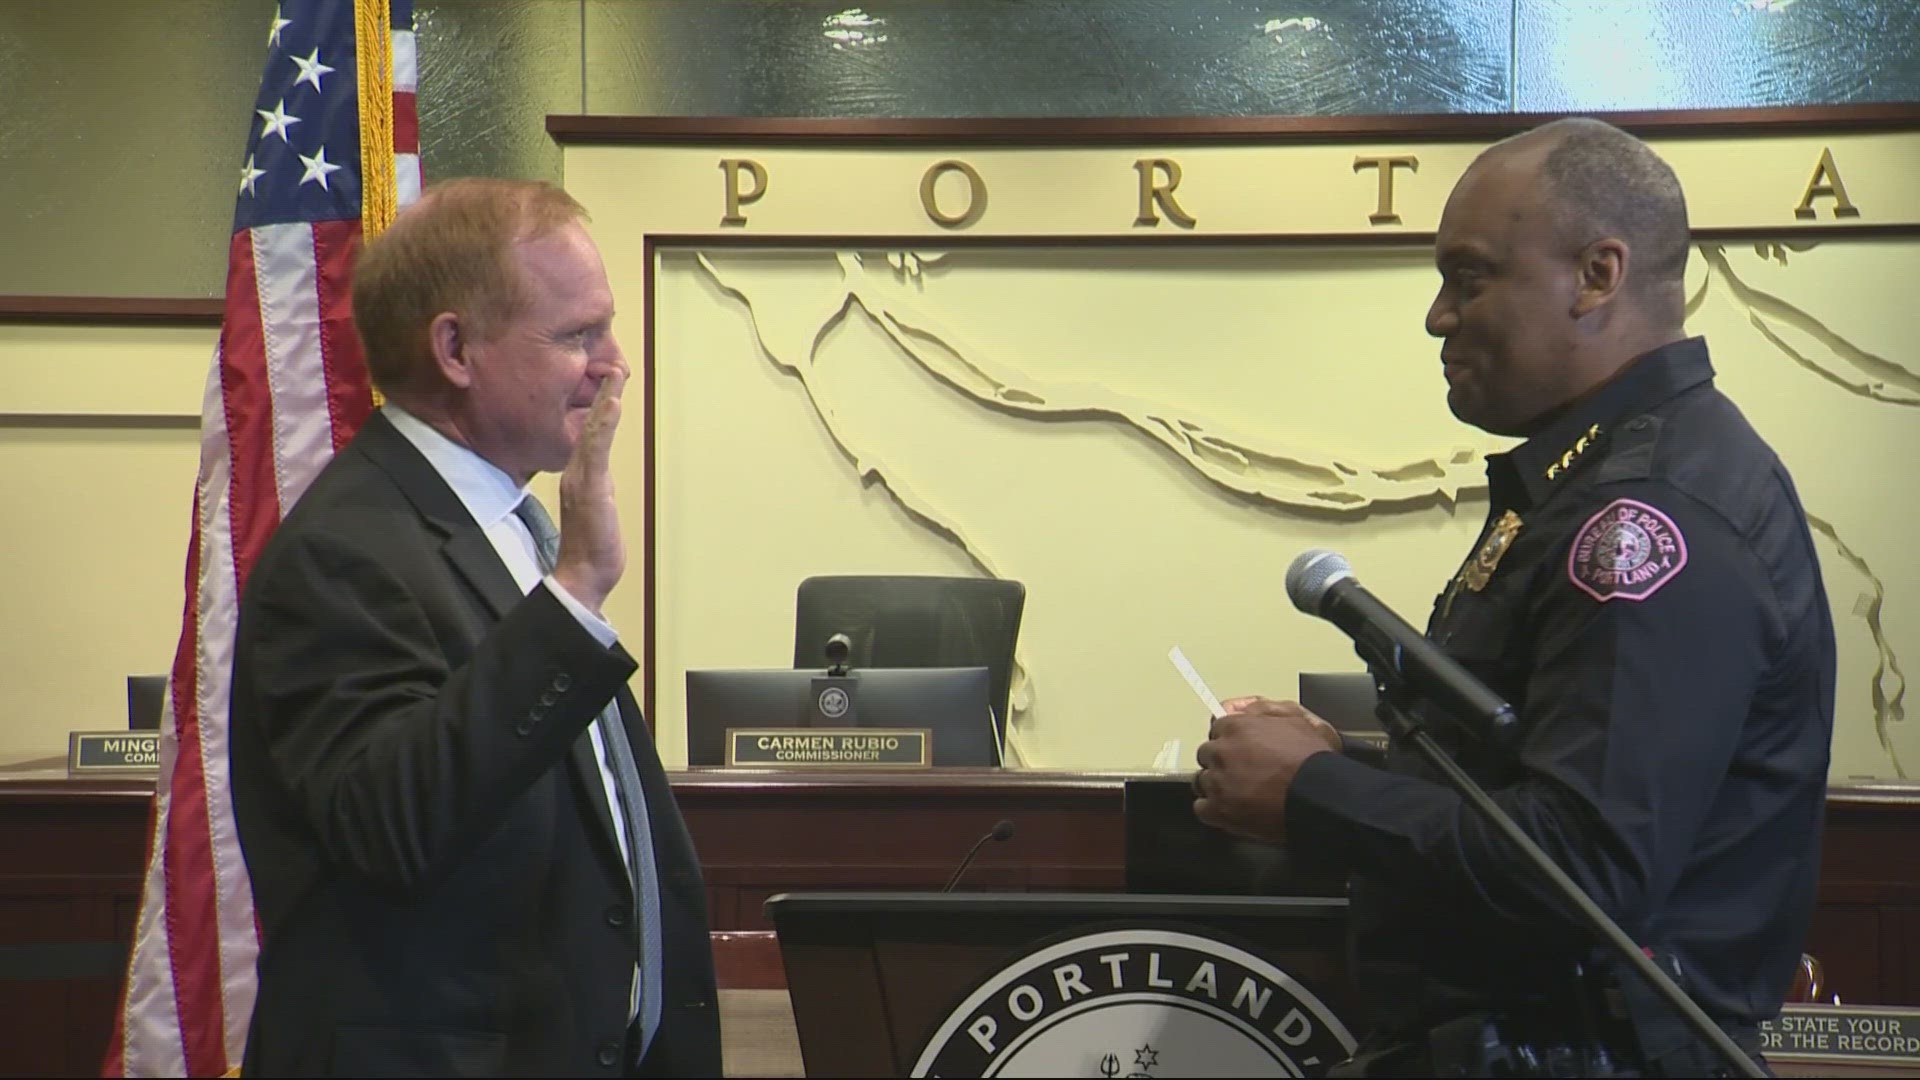 Day was sworn in Wednesday morning and will serve as interim chief until some point in 2025. His predecessor, Chuck Lovell, administered the oath of office.